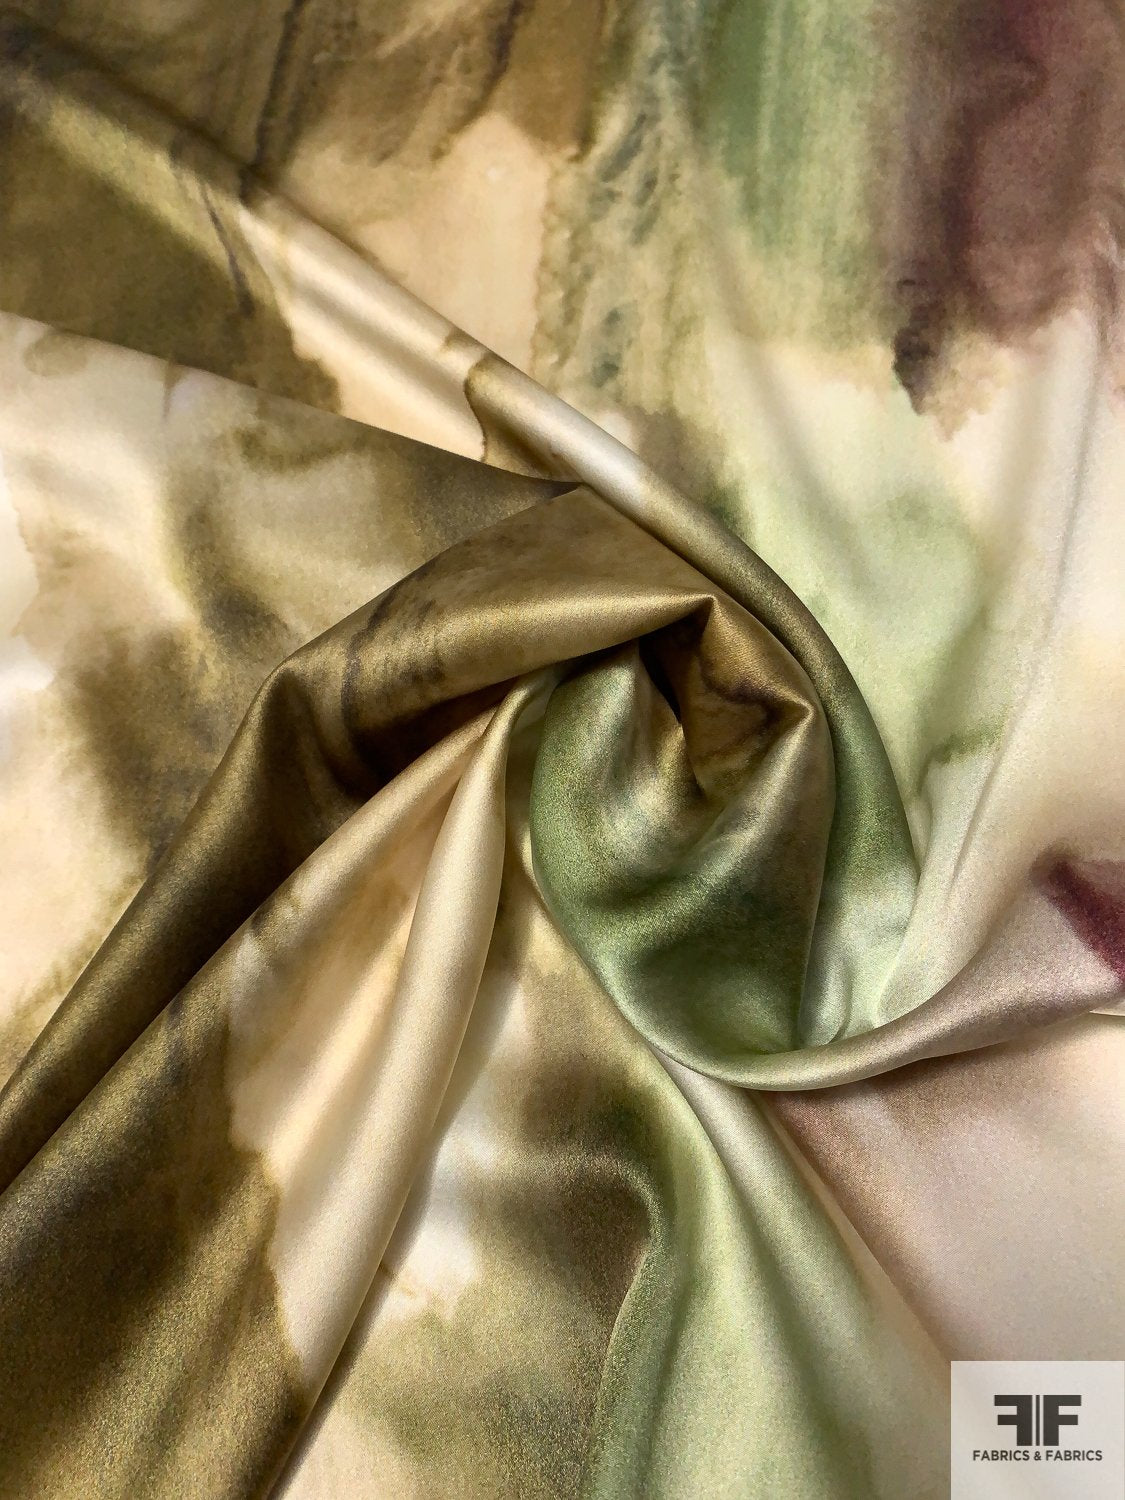 Abstract Painterly Printed Stretch Silk Charmeuse - Shades of Green / Earth